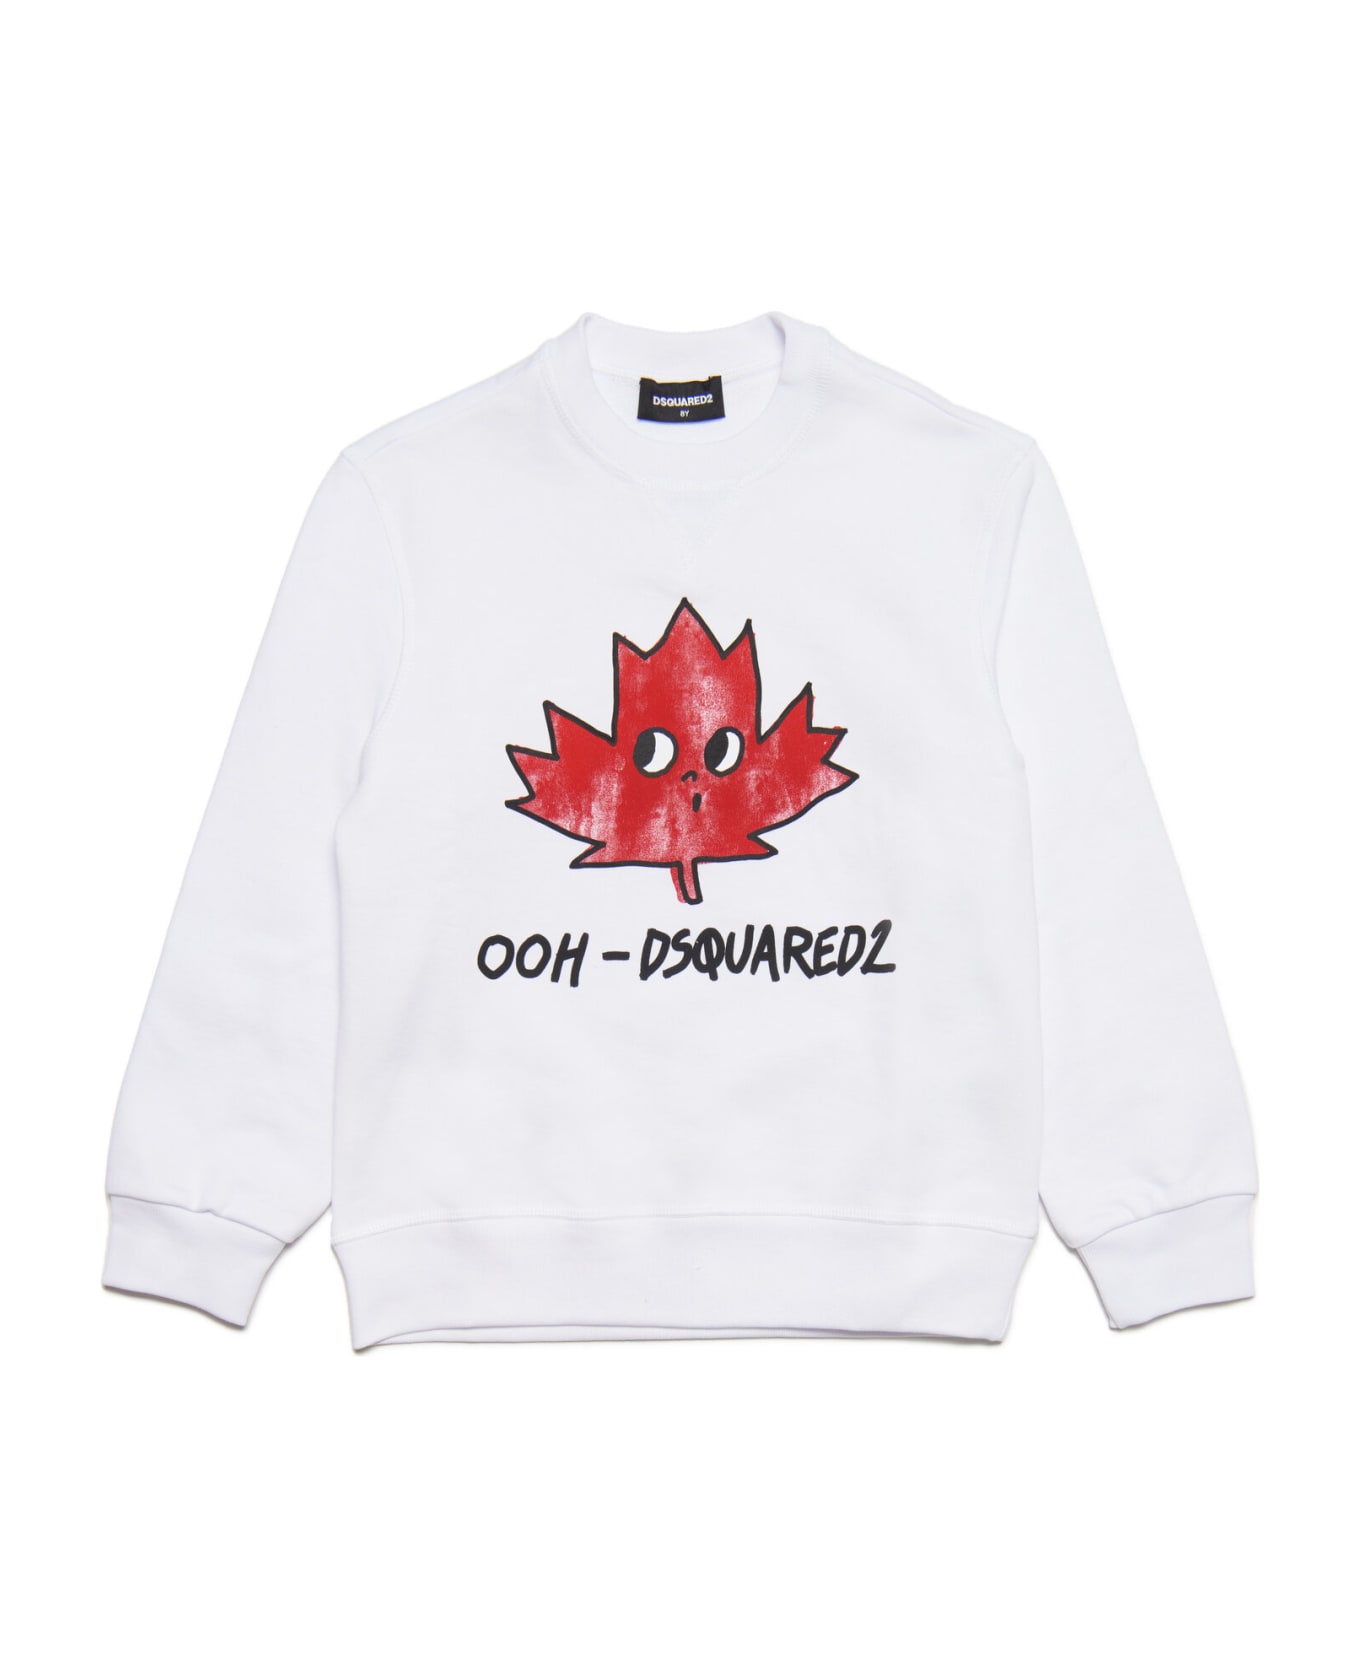 Dsquared2 D2s695u Relax Sweat-shirt Dsquared White Cotton Sweatshirt With Maple Leaf - White